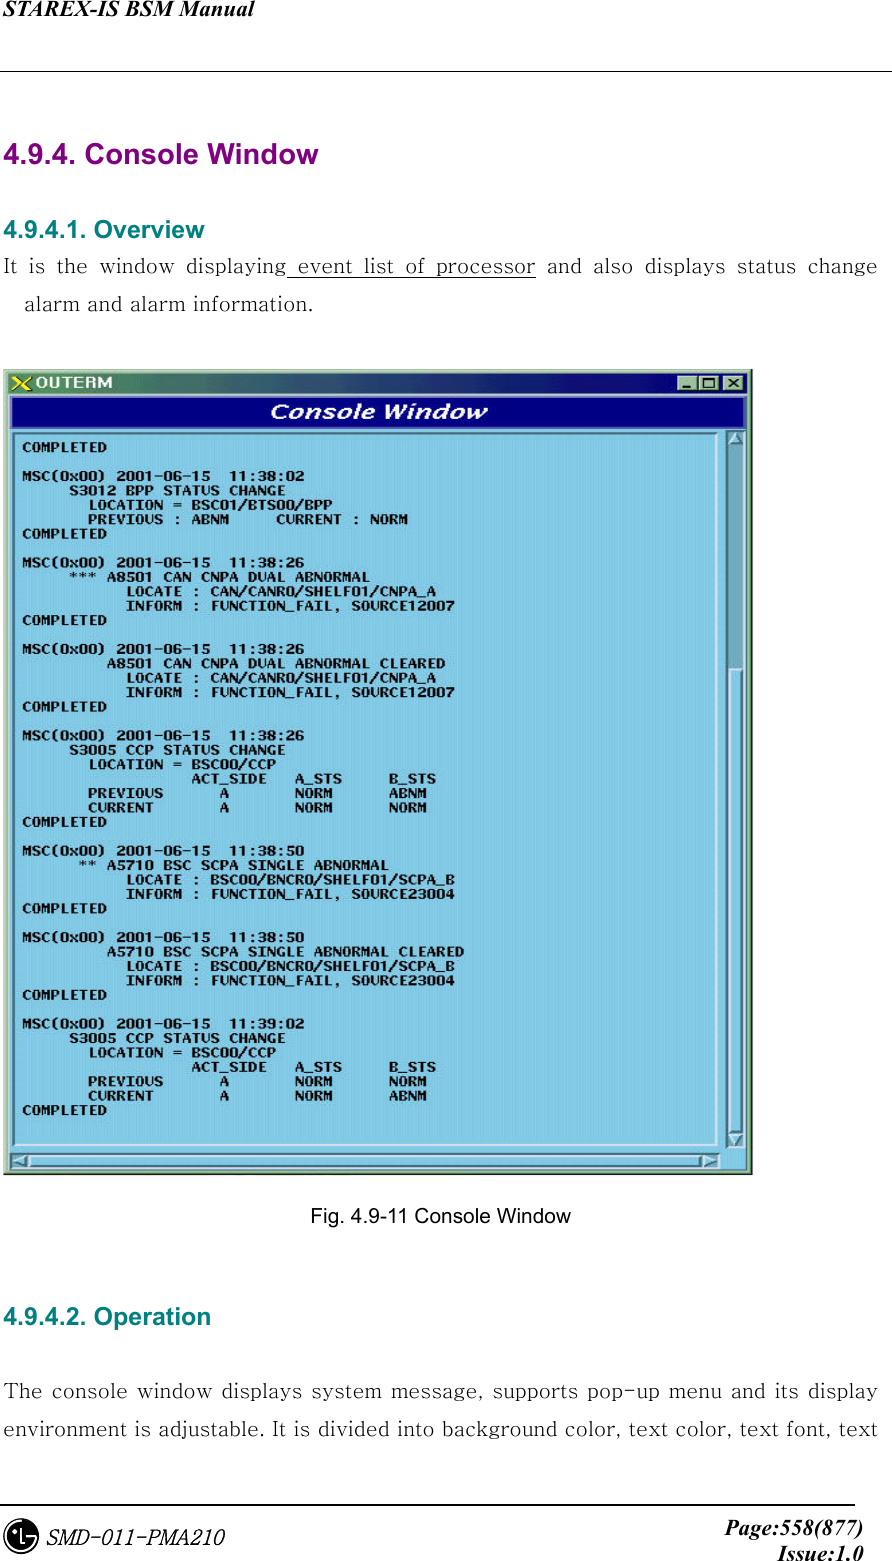 STAREX-IS BSM Manual     Page:558(877)Issue:1.0SMD-011-PMA210  4.9.4. Console Window  4.9.4.1. Overview It  is  the  window  displaying  event  list  of  processor and also displays status change alarm and alarm information.   Fig. 4.9-11 Console Window  4.9.4.2. Operation  The console window displays system message, supports pop-up menu and its display environment is adjustable. It is divided into background color, text color, text font, text 